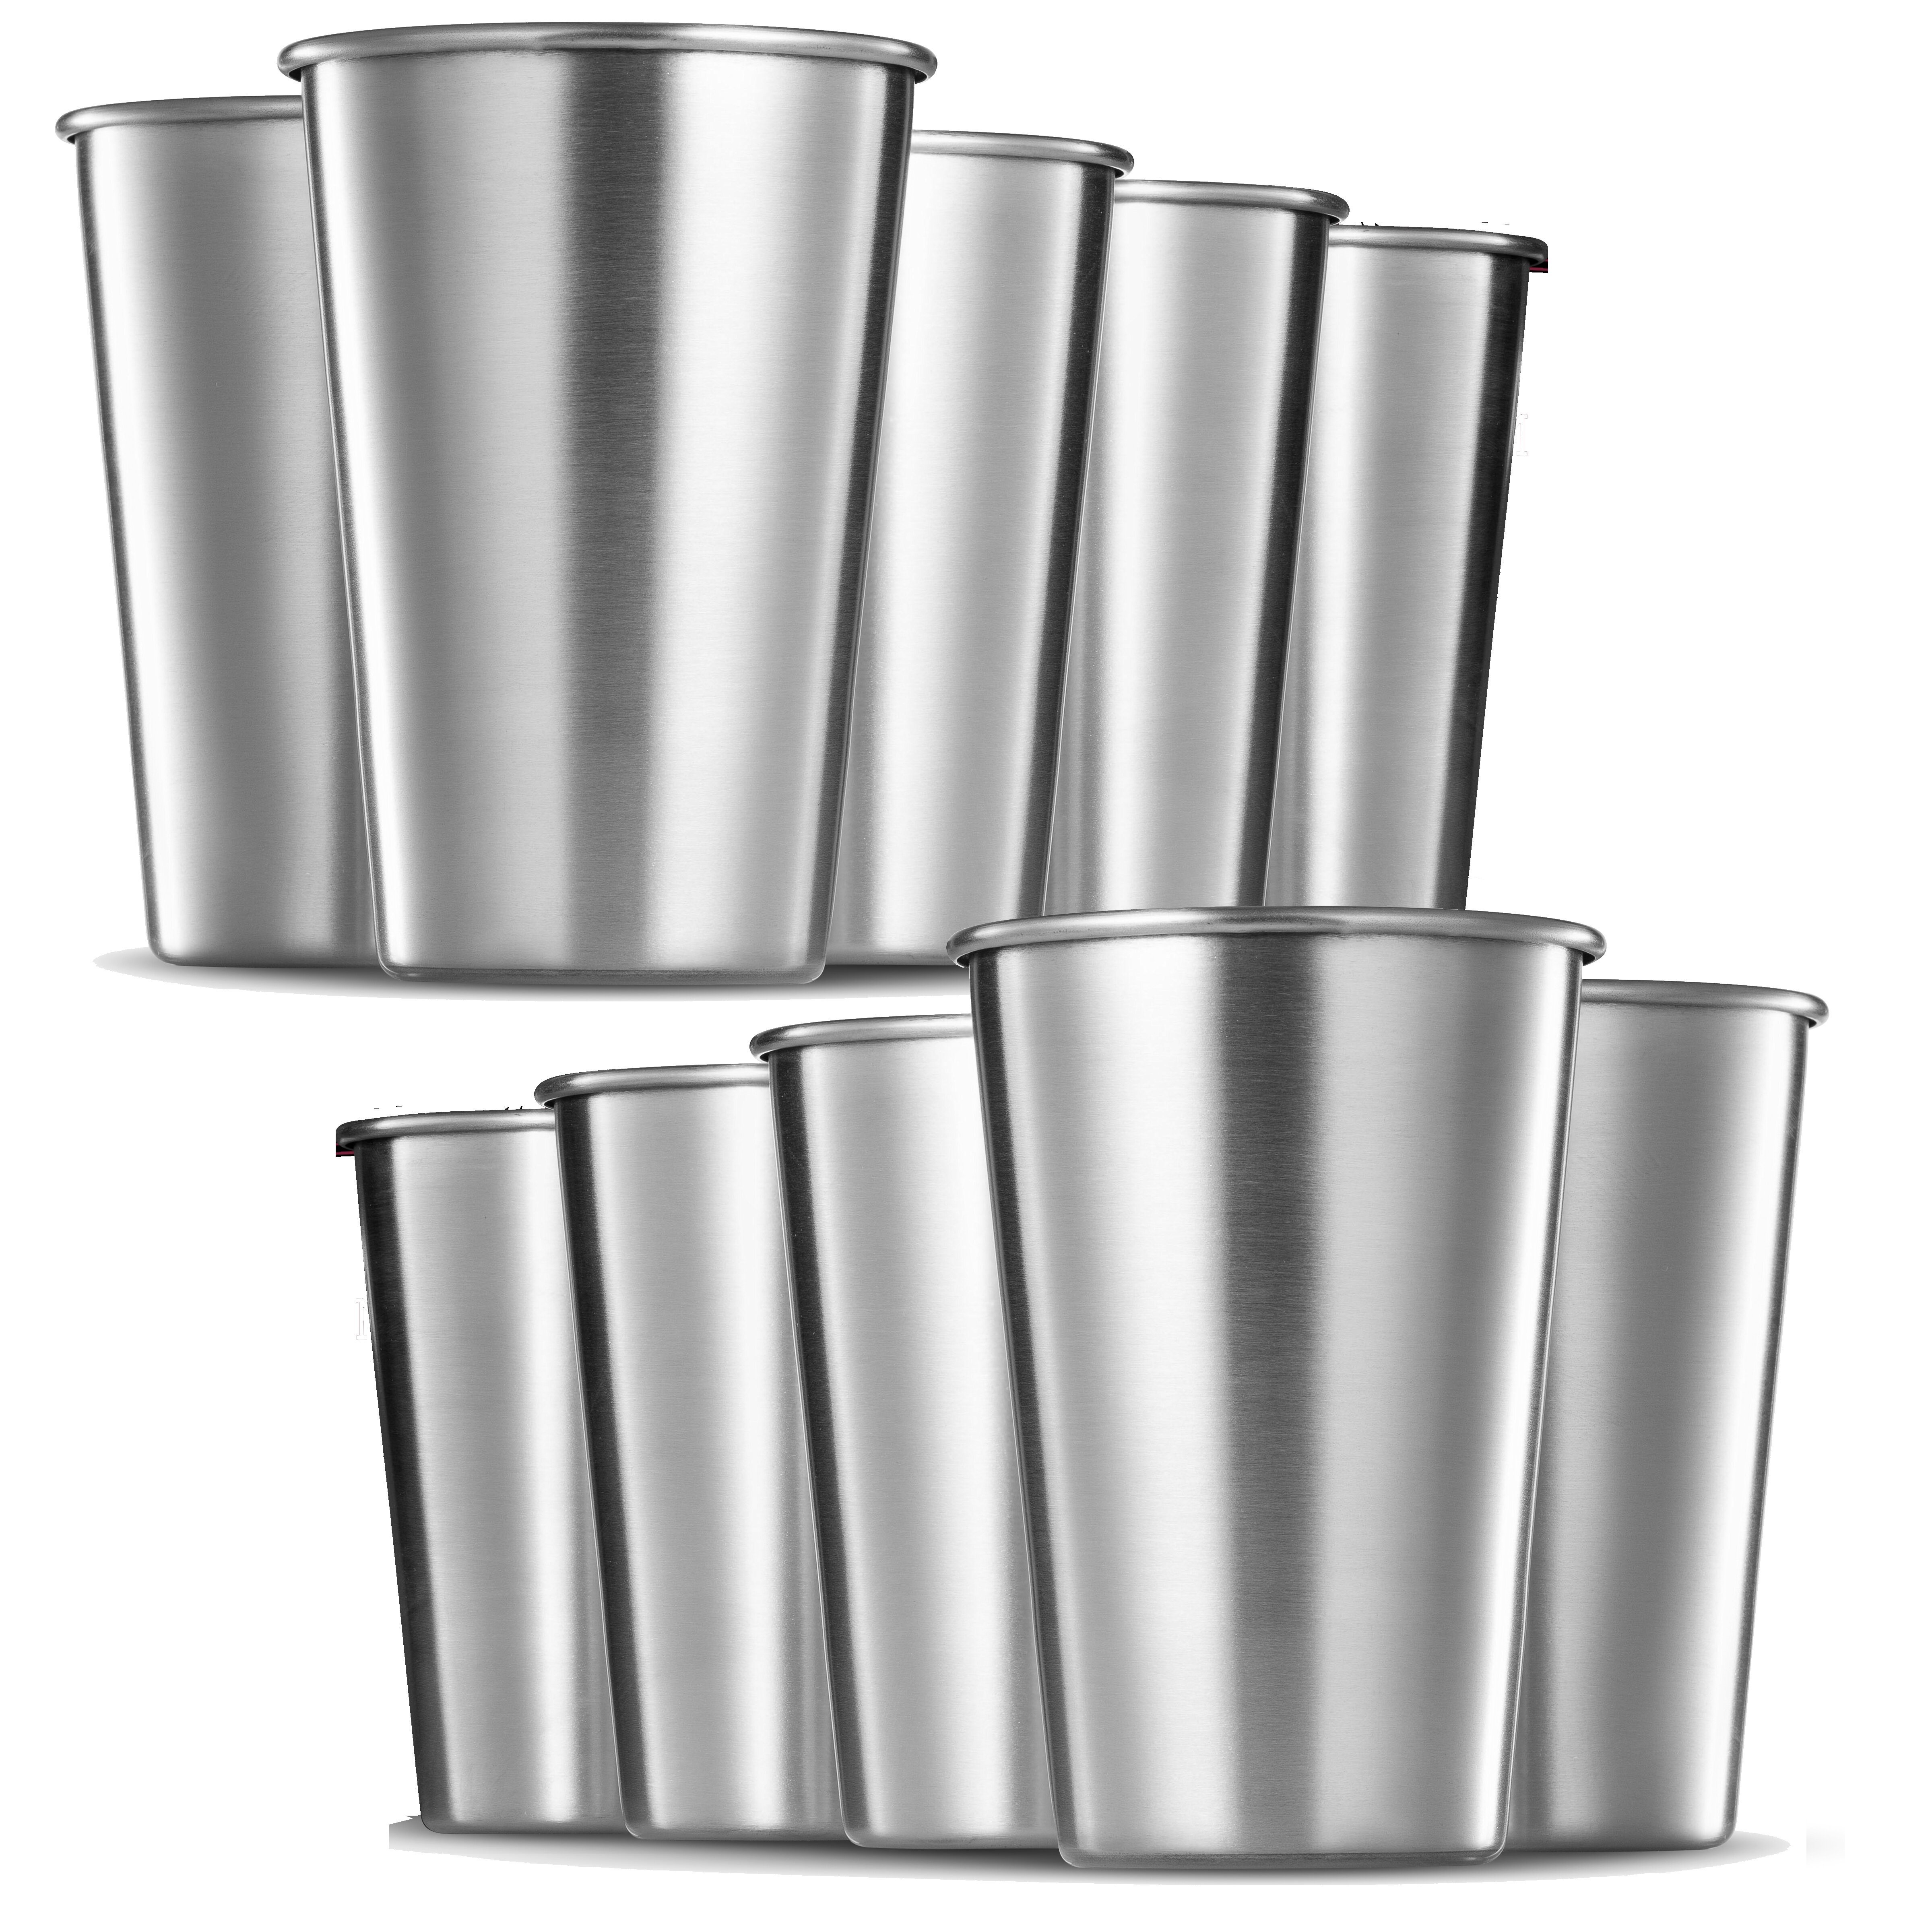 Premium Grade Stainless Steel Pint Cups Water Tumblers For Any Occasion 5 Pcs.